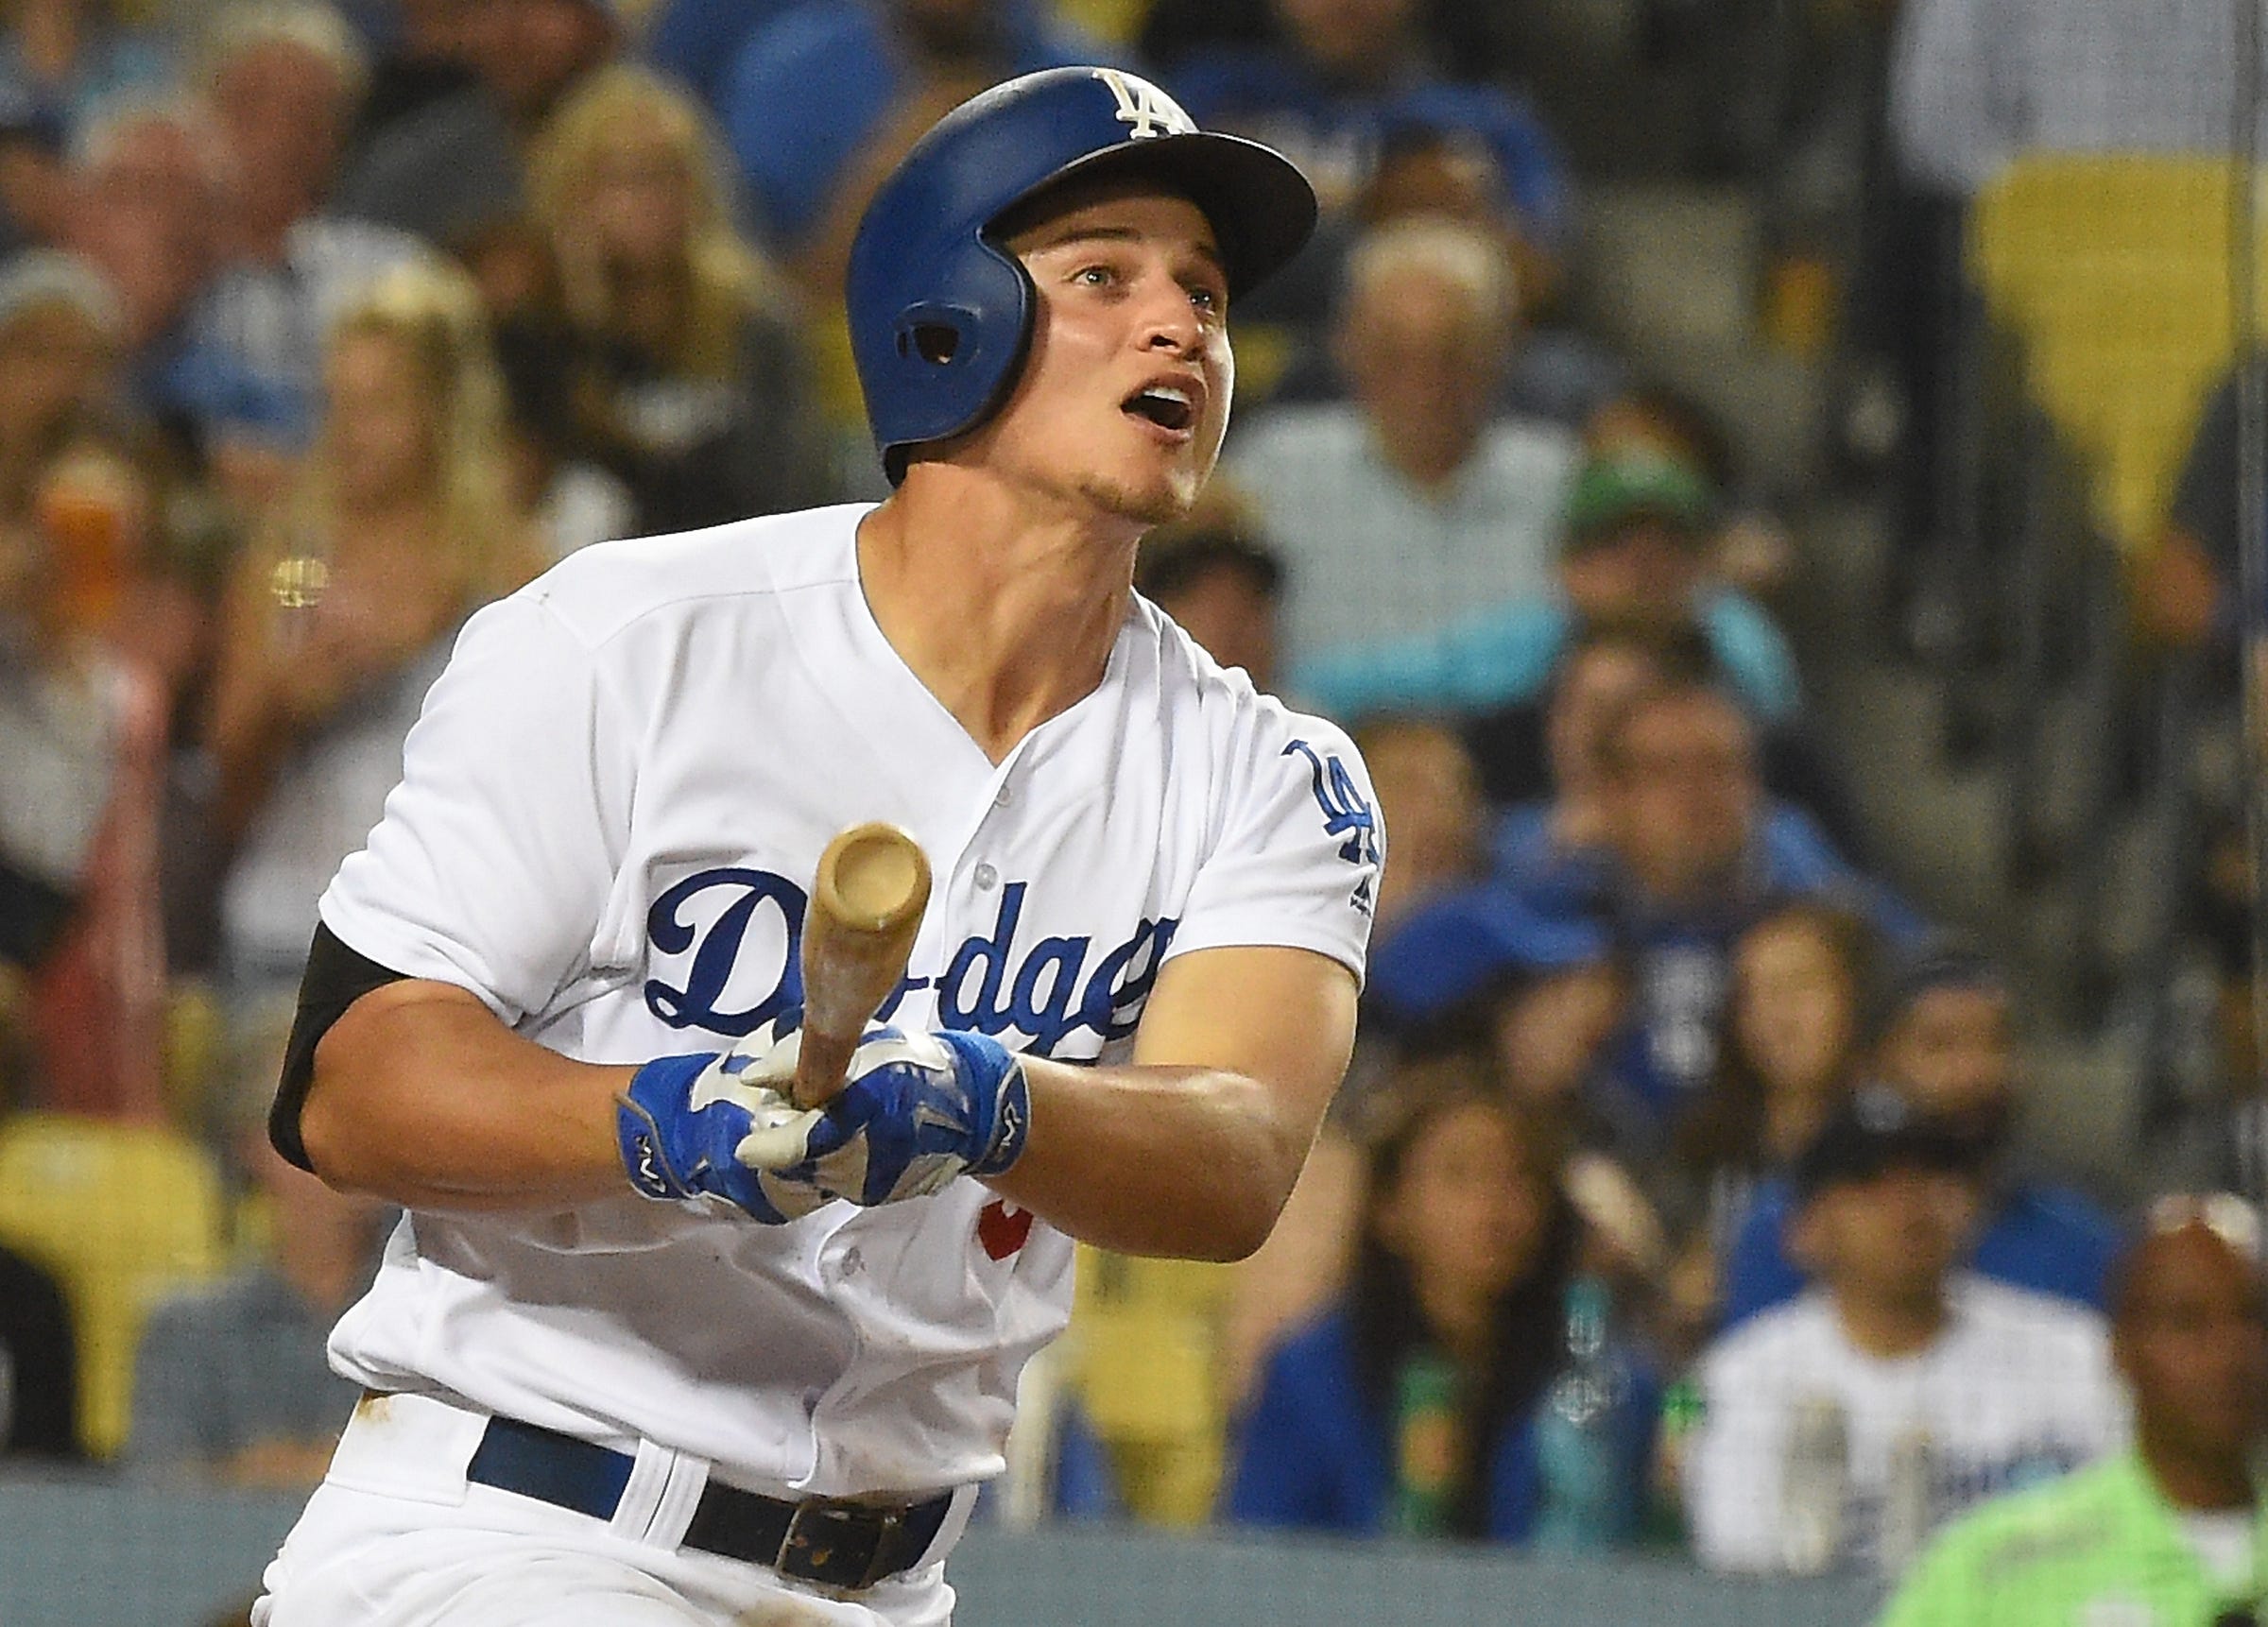 It’s unanimous Corey Seager is NL Rookie of the Year